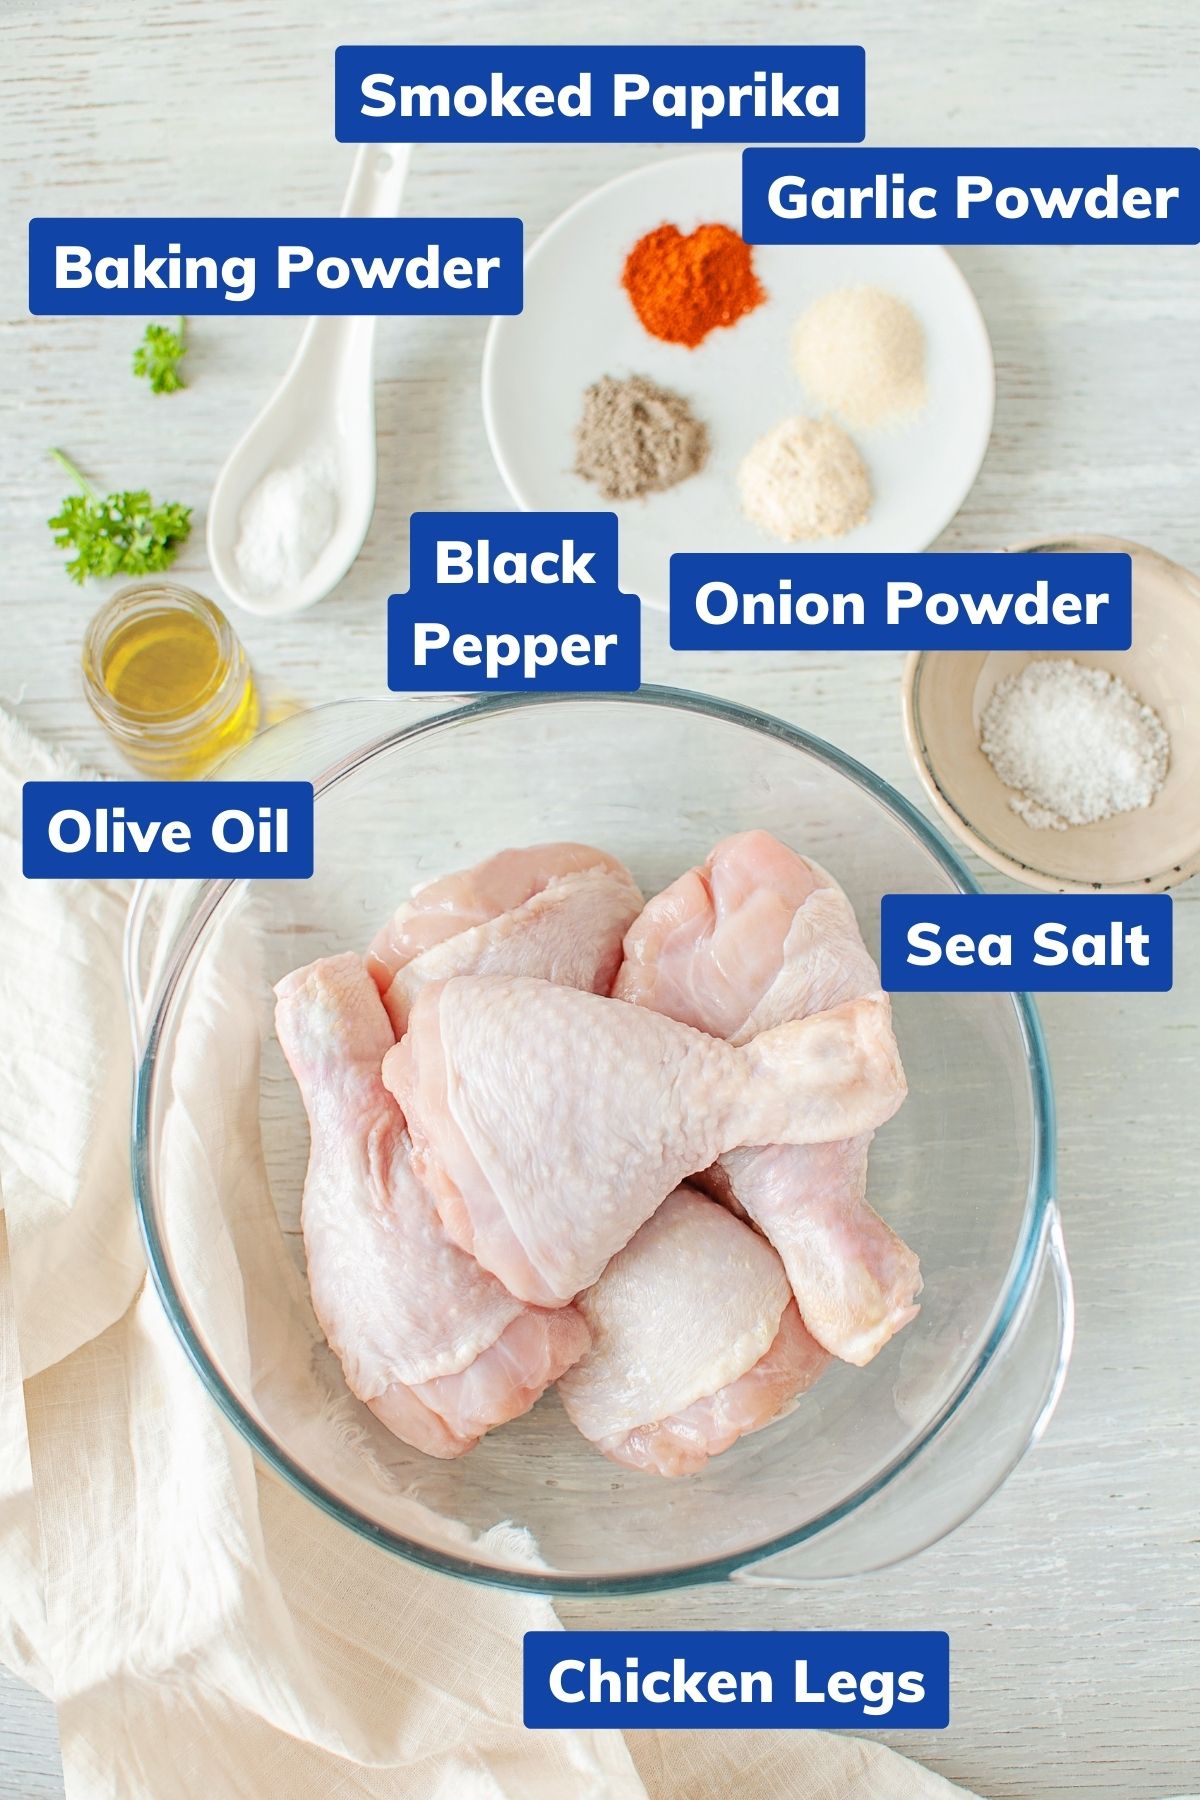 ingredients needed for air fryer fried chicken legs: smoked paprika, garlic powder, baking powder, black pepper, olive oil, sea salt, and chicken legs in separate bowls and dishes